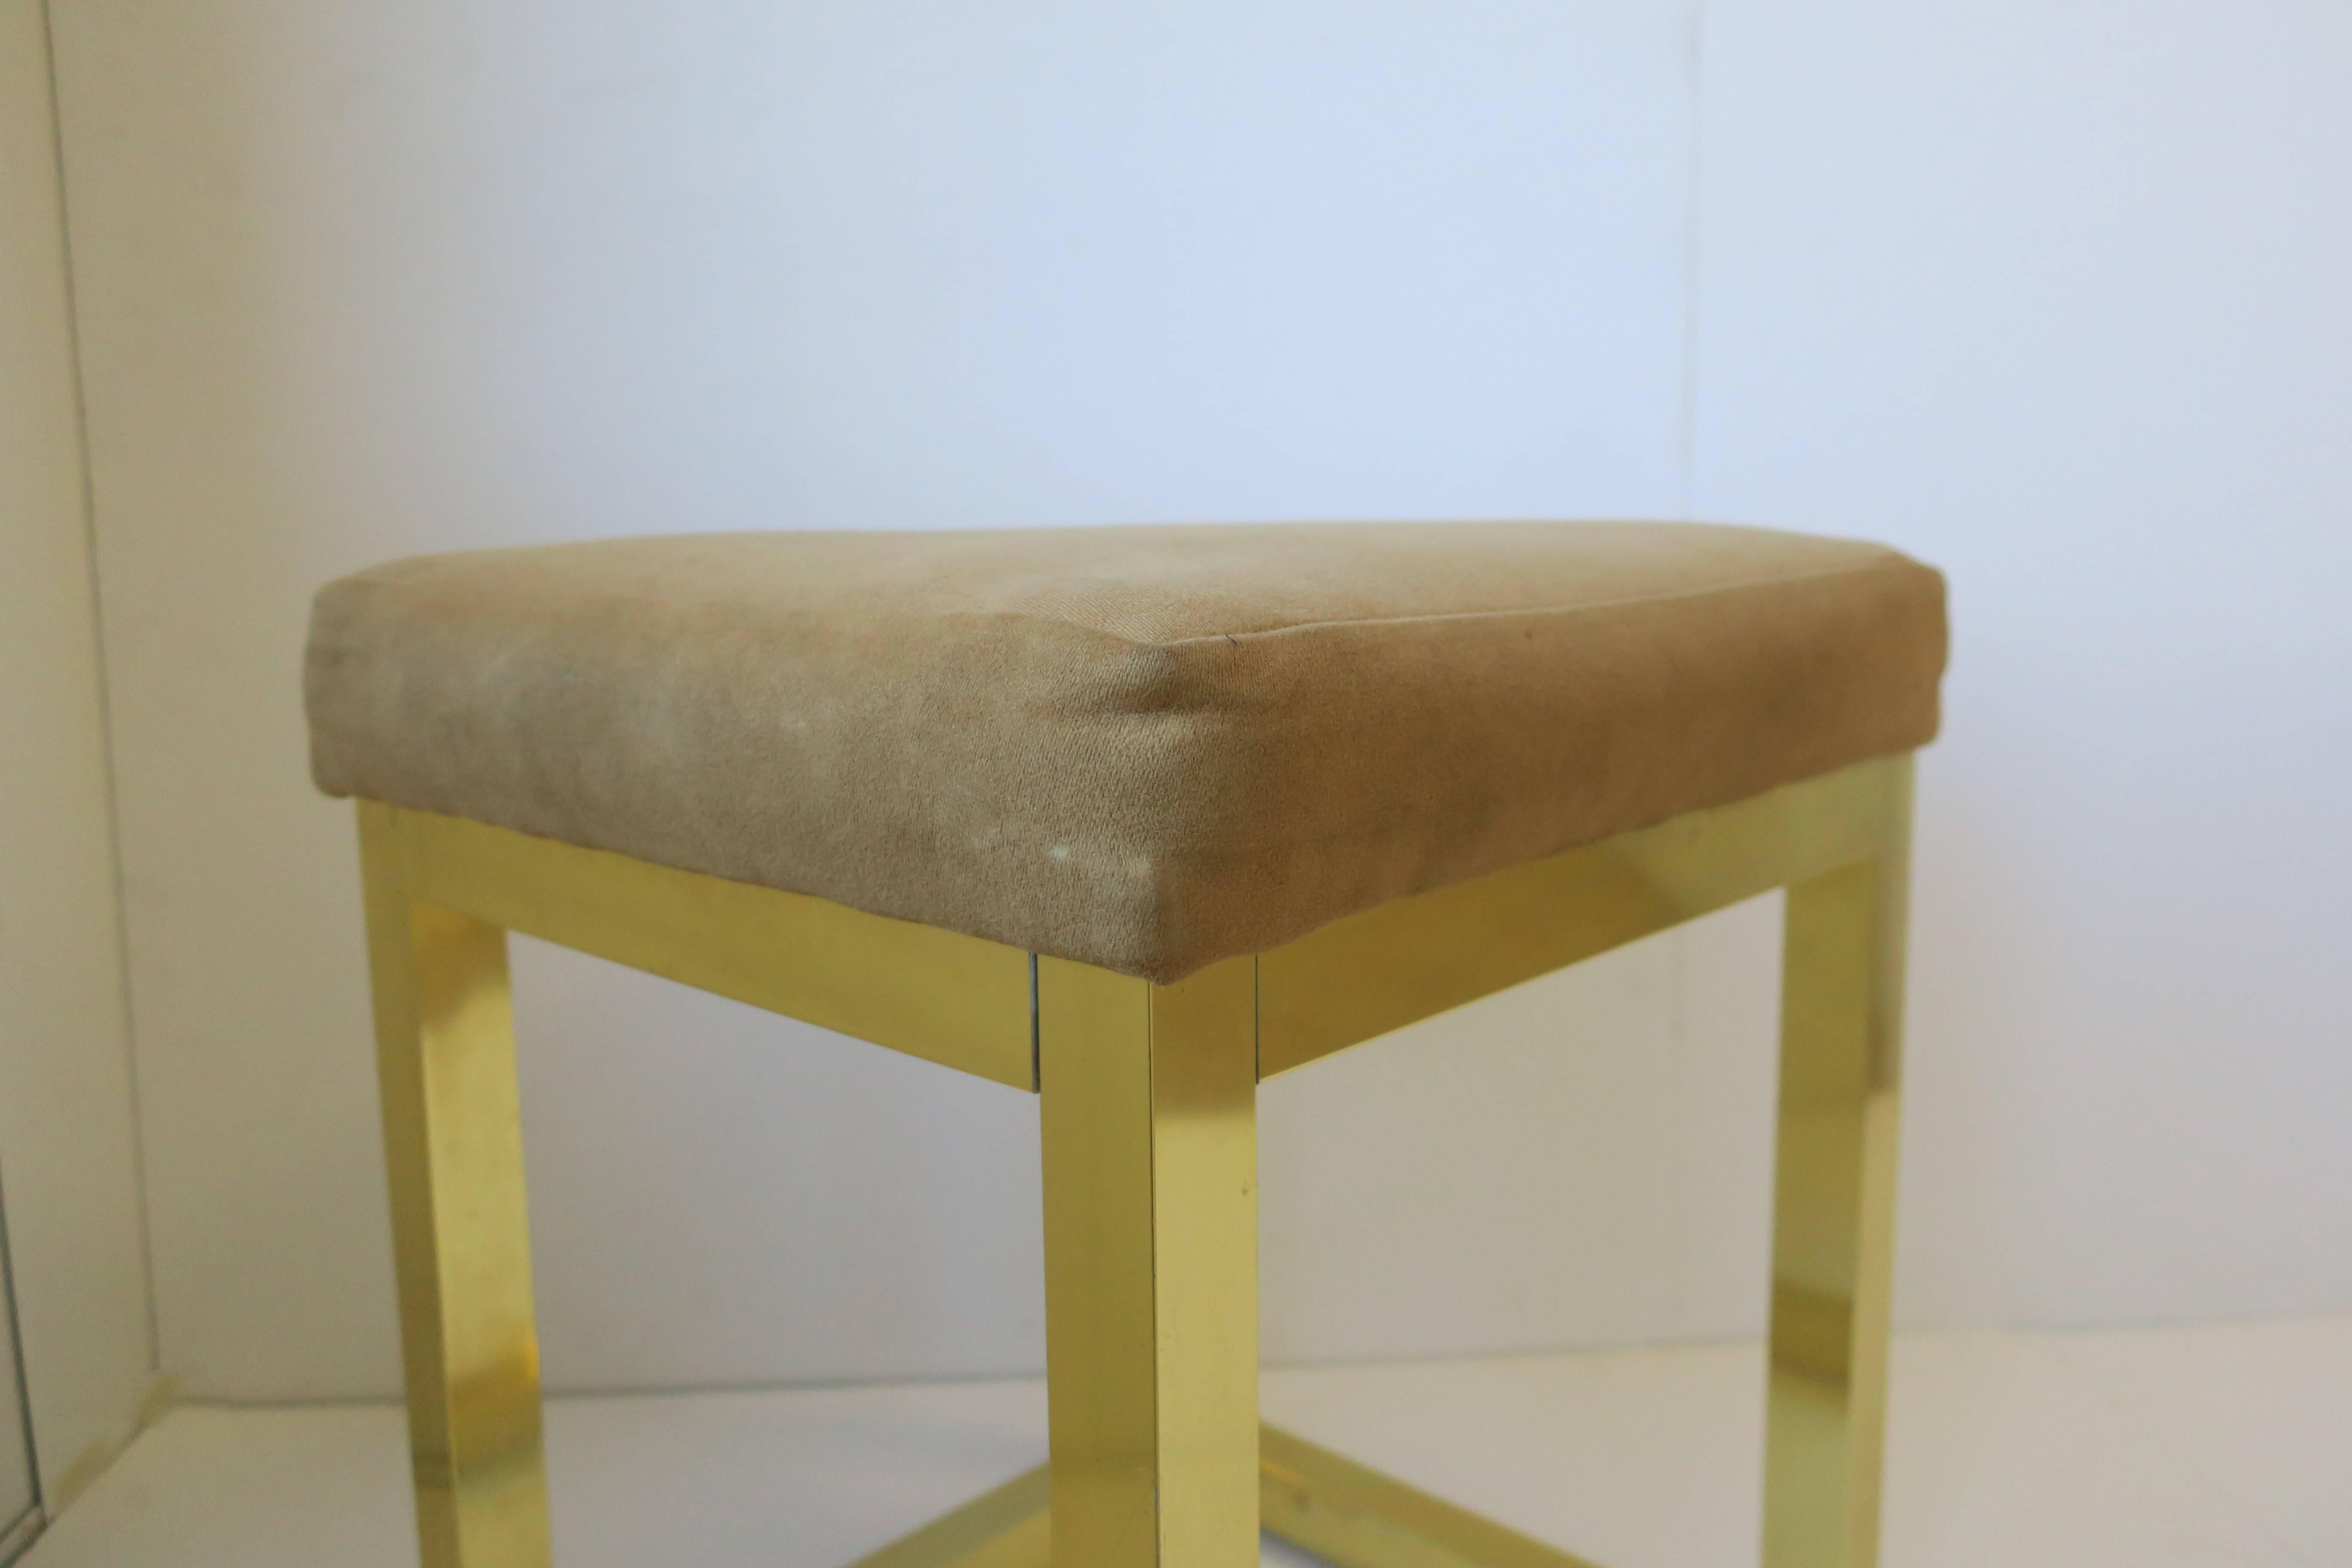 1970s Modern Brass Bench or Stool in the Style of Designer Paul Evans For Sale 6